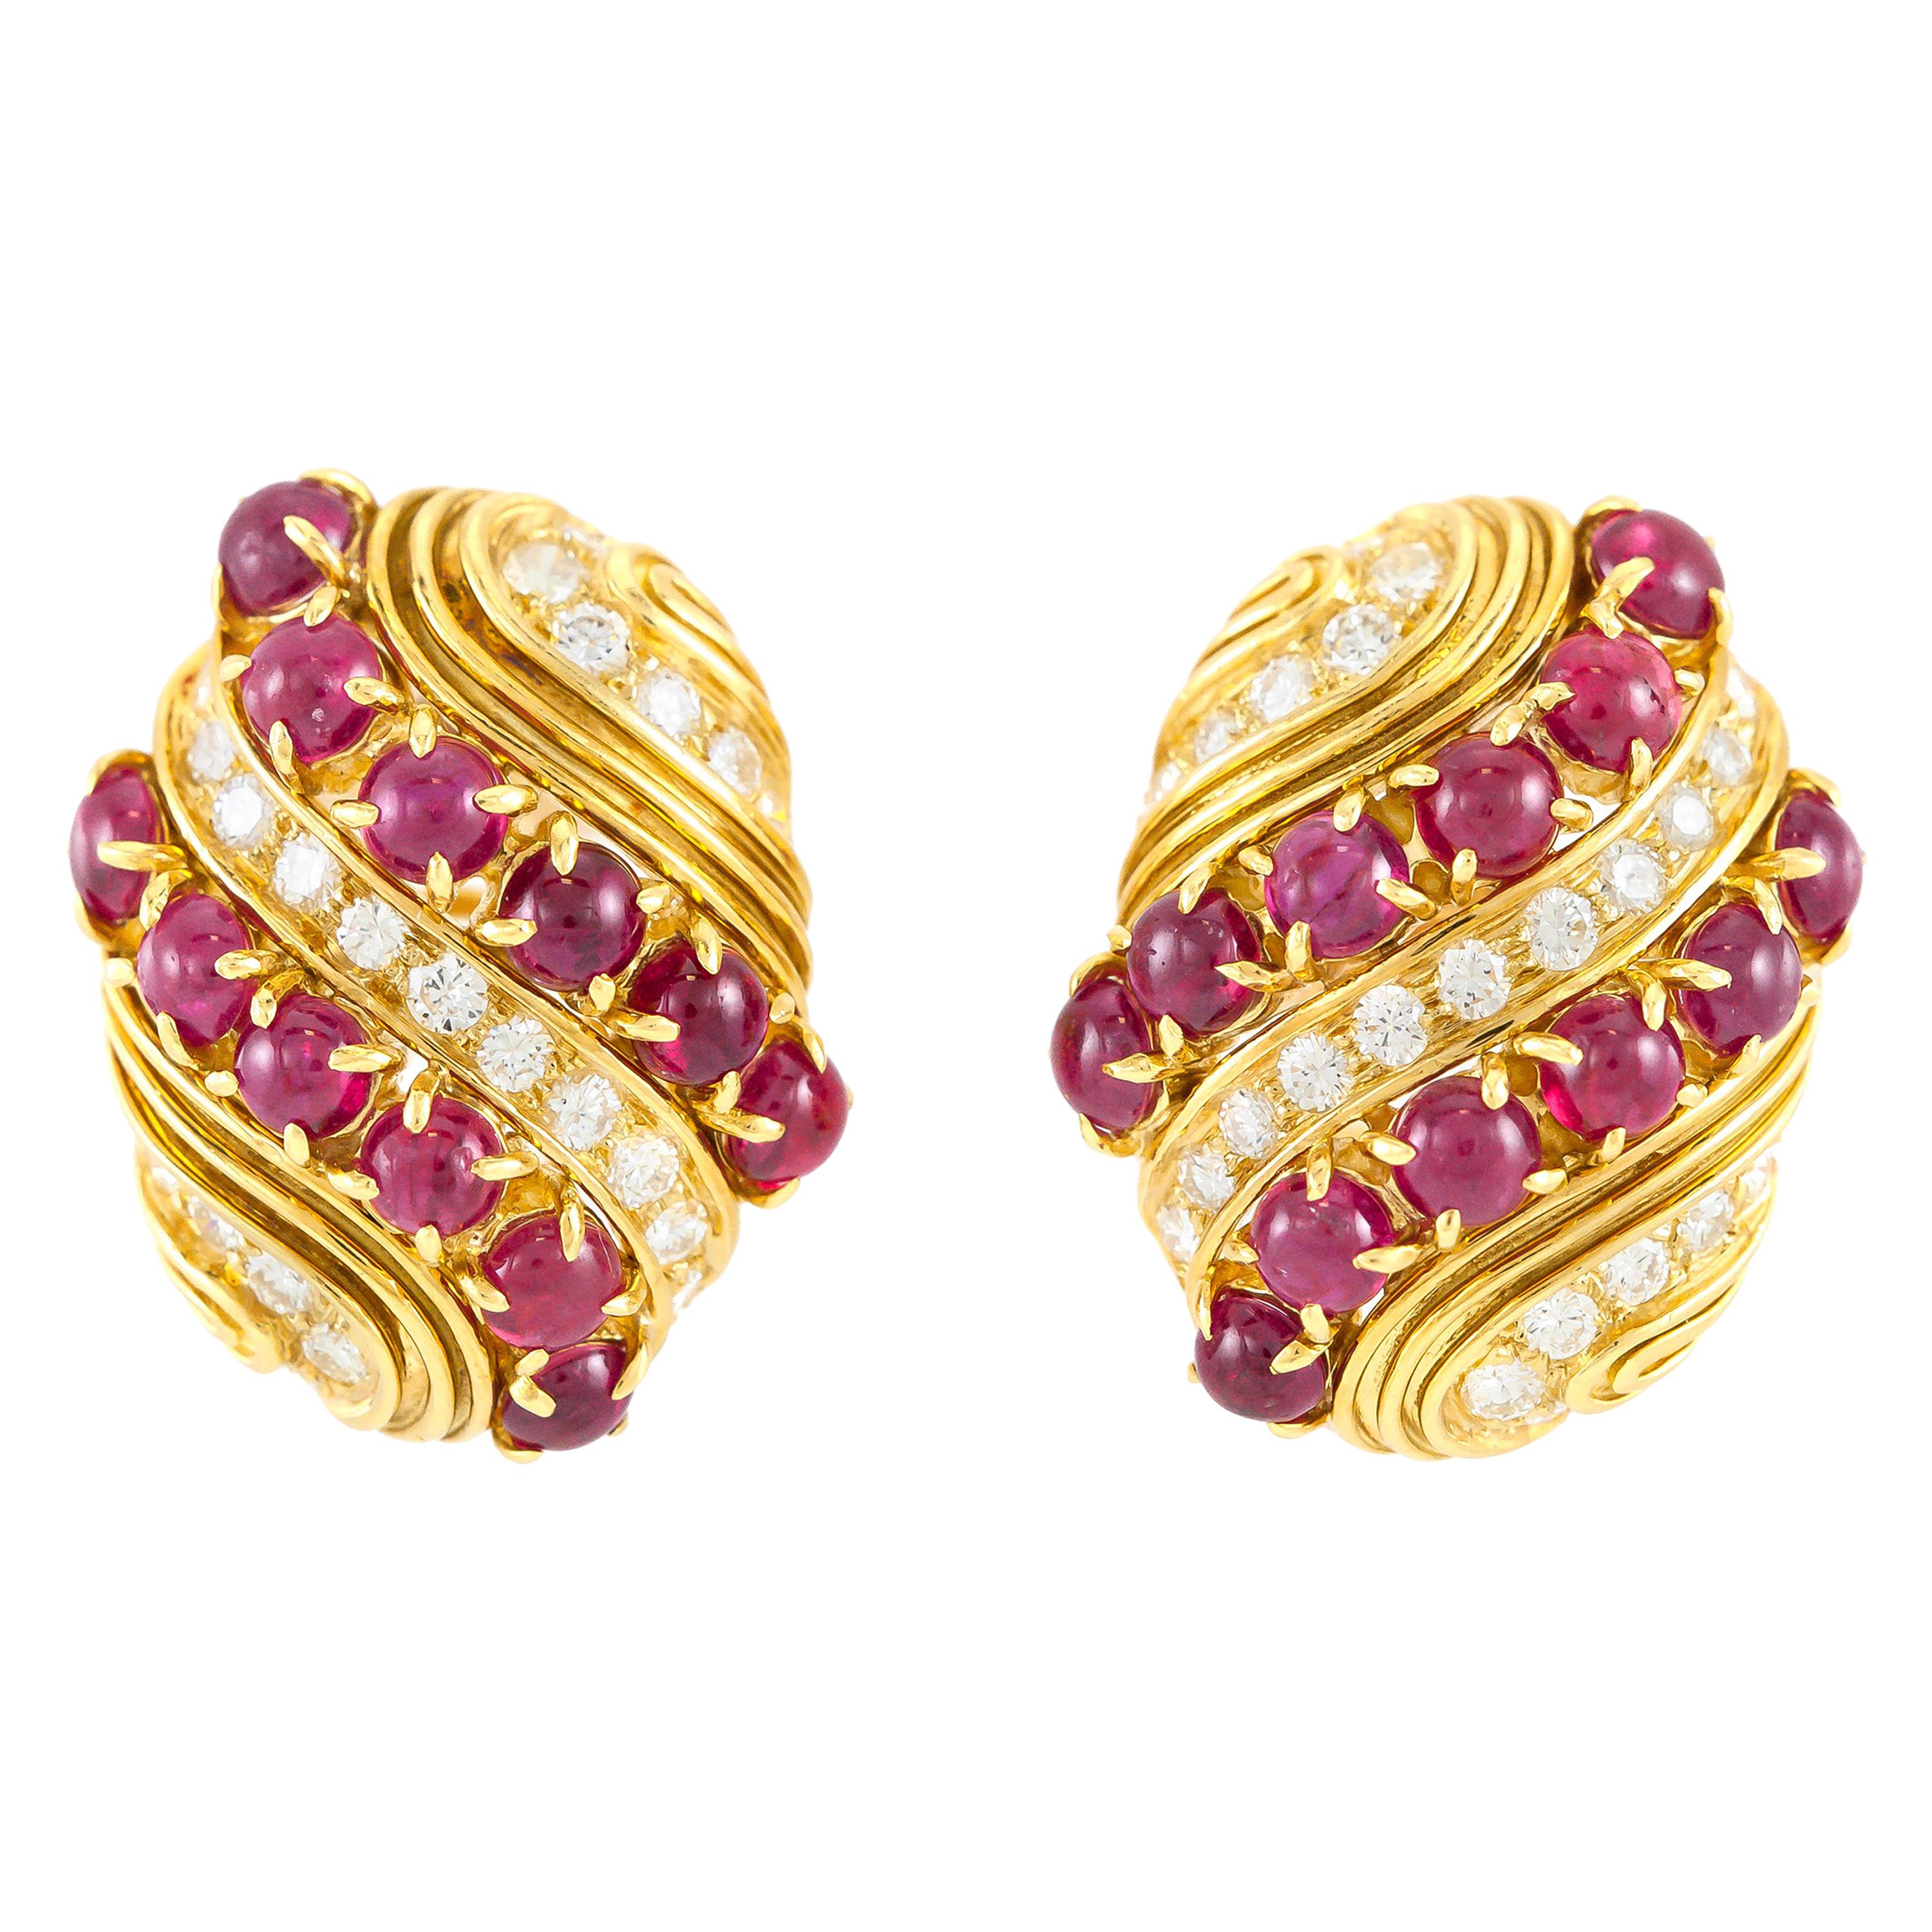 Harry Winston Cabochon Ruby and Diamond Earrings